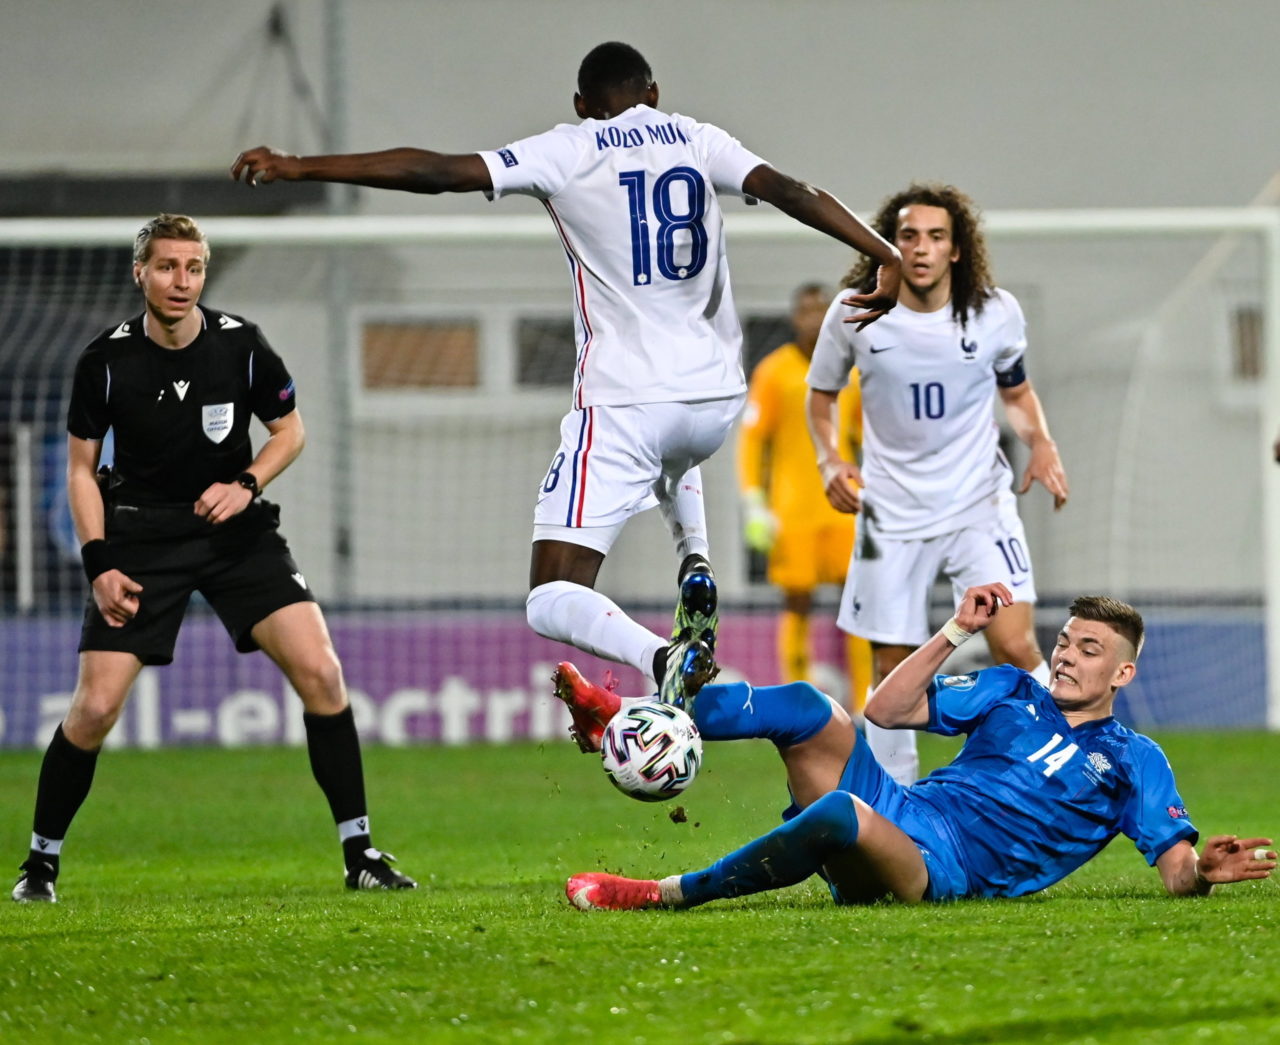 epa09109245 Randal Kolo Muani (C) of France in action against Brynjolfur Andersen Willumsson of Iceland during the UEFA European Under-21 Championship match between Iceland and France in Gyirmot, Hungary, 31 March 2021. EPA-EFE/TAMAS VASVARI HUNGARY OUT